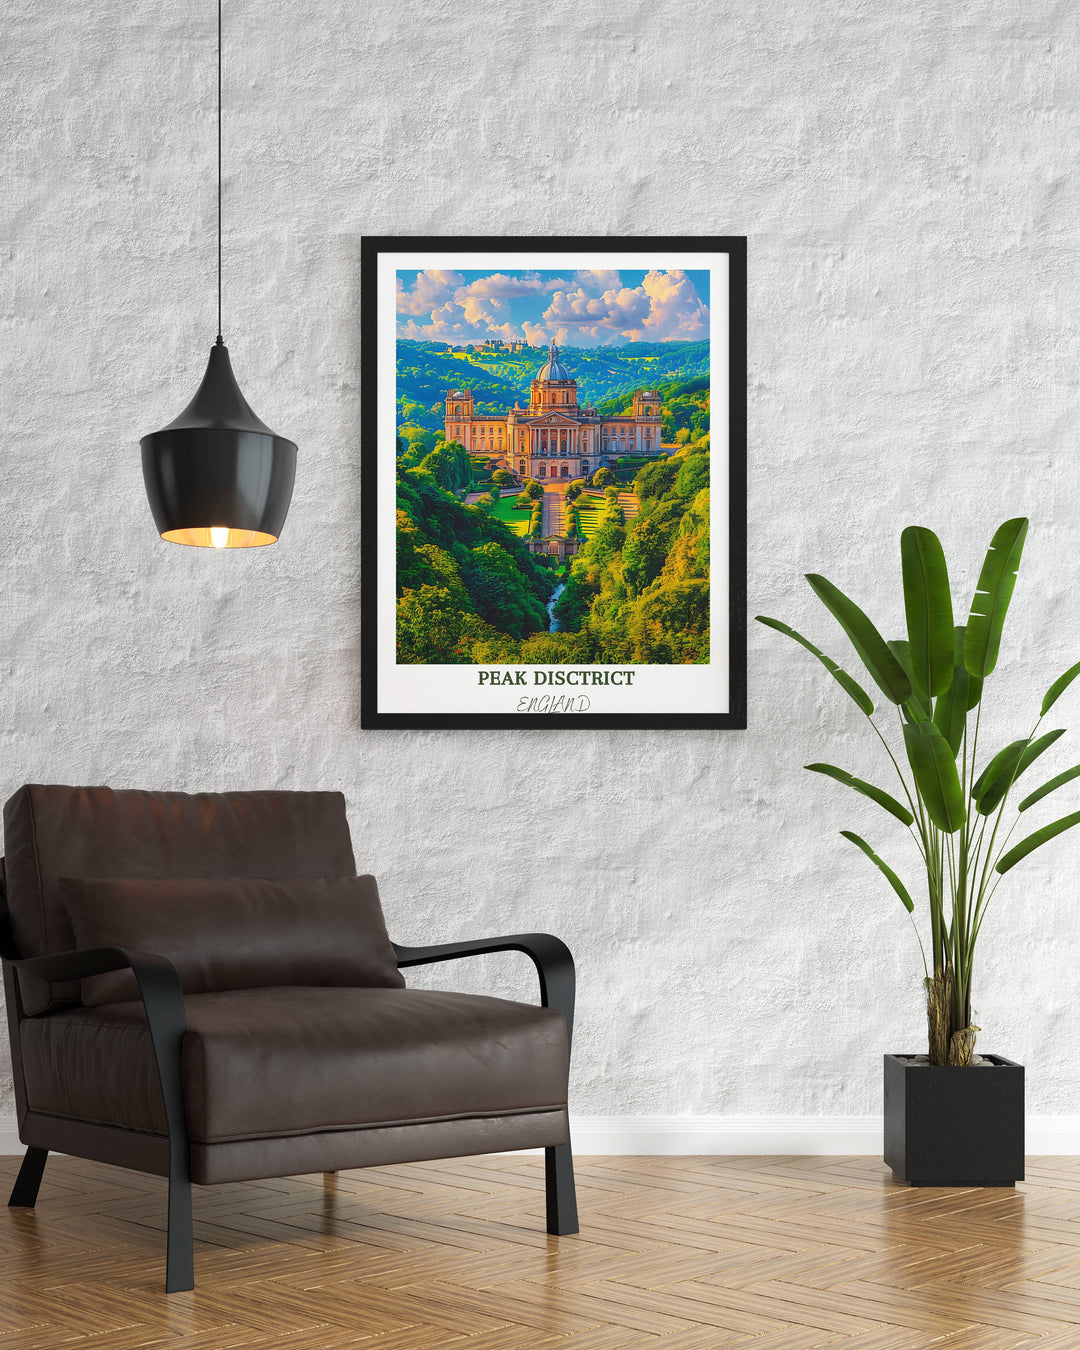 Embrace the tranquility of the Peak District with this captivating artwork showcasing the iconic Chatsworth House.